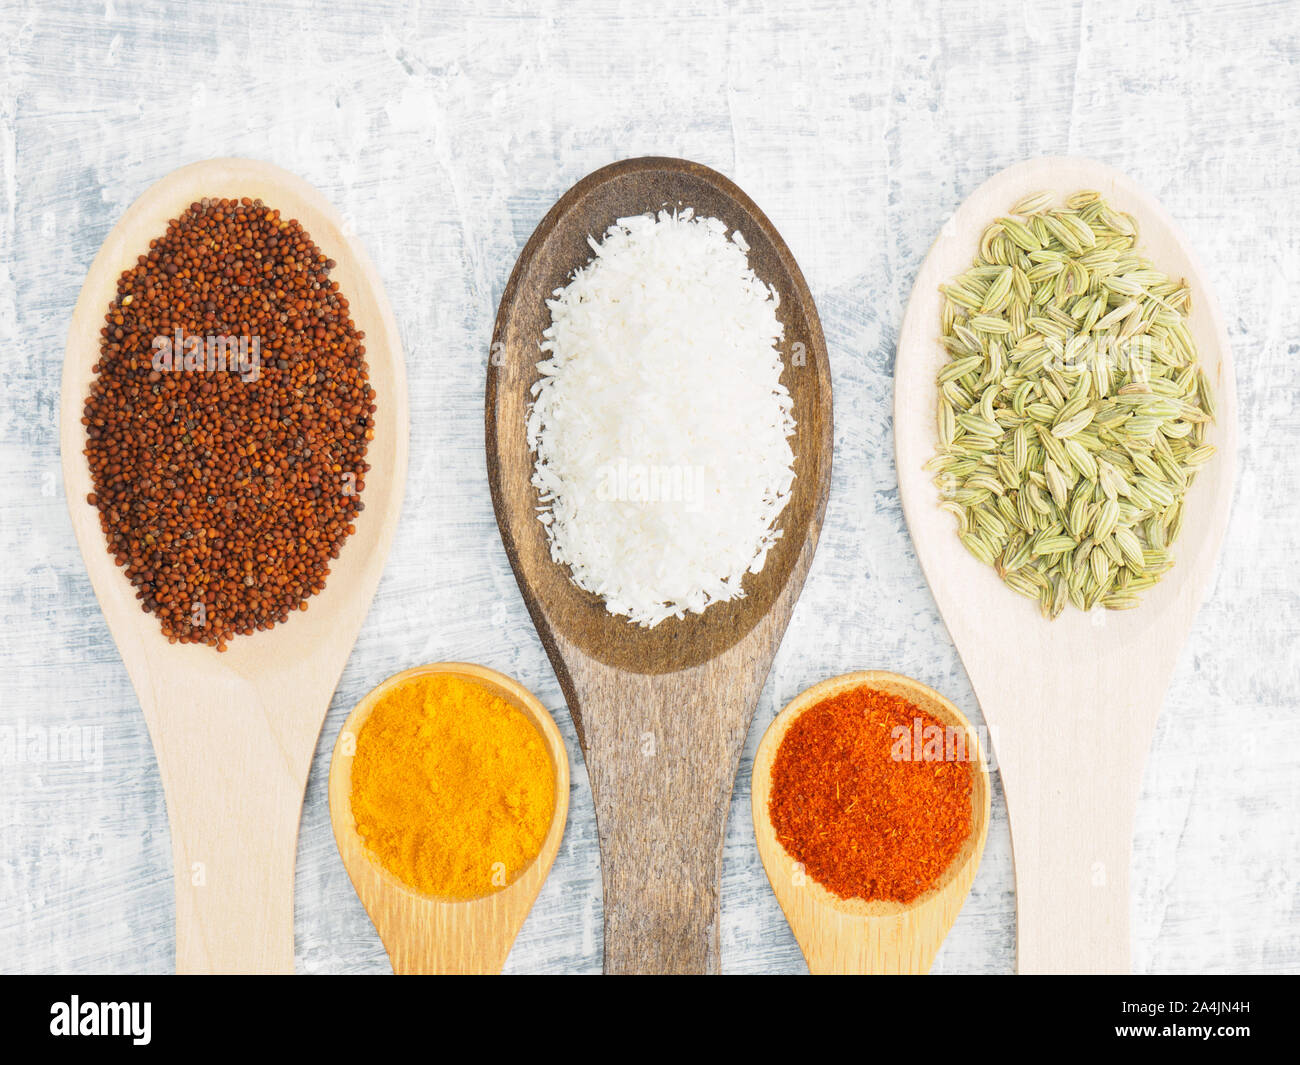 Spices and herbs set on concrete background in wooden spoon. Turmeric, fennel, mustard, chili pepper, masala. Modern apothecary, naturopathy and ayurv Stock Photo